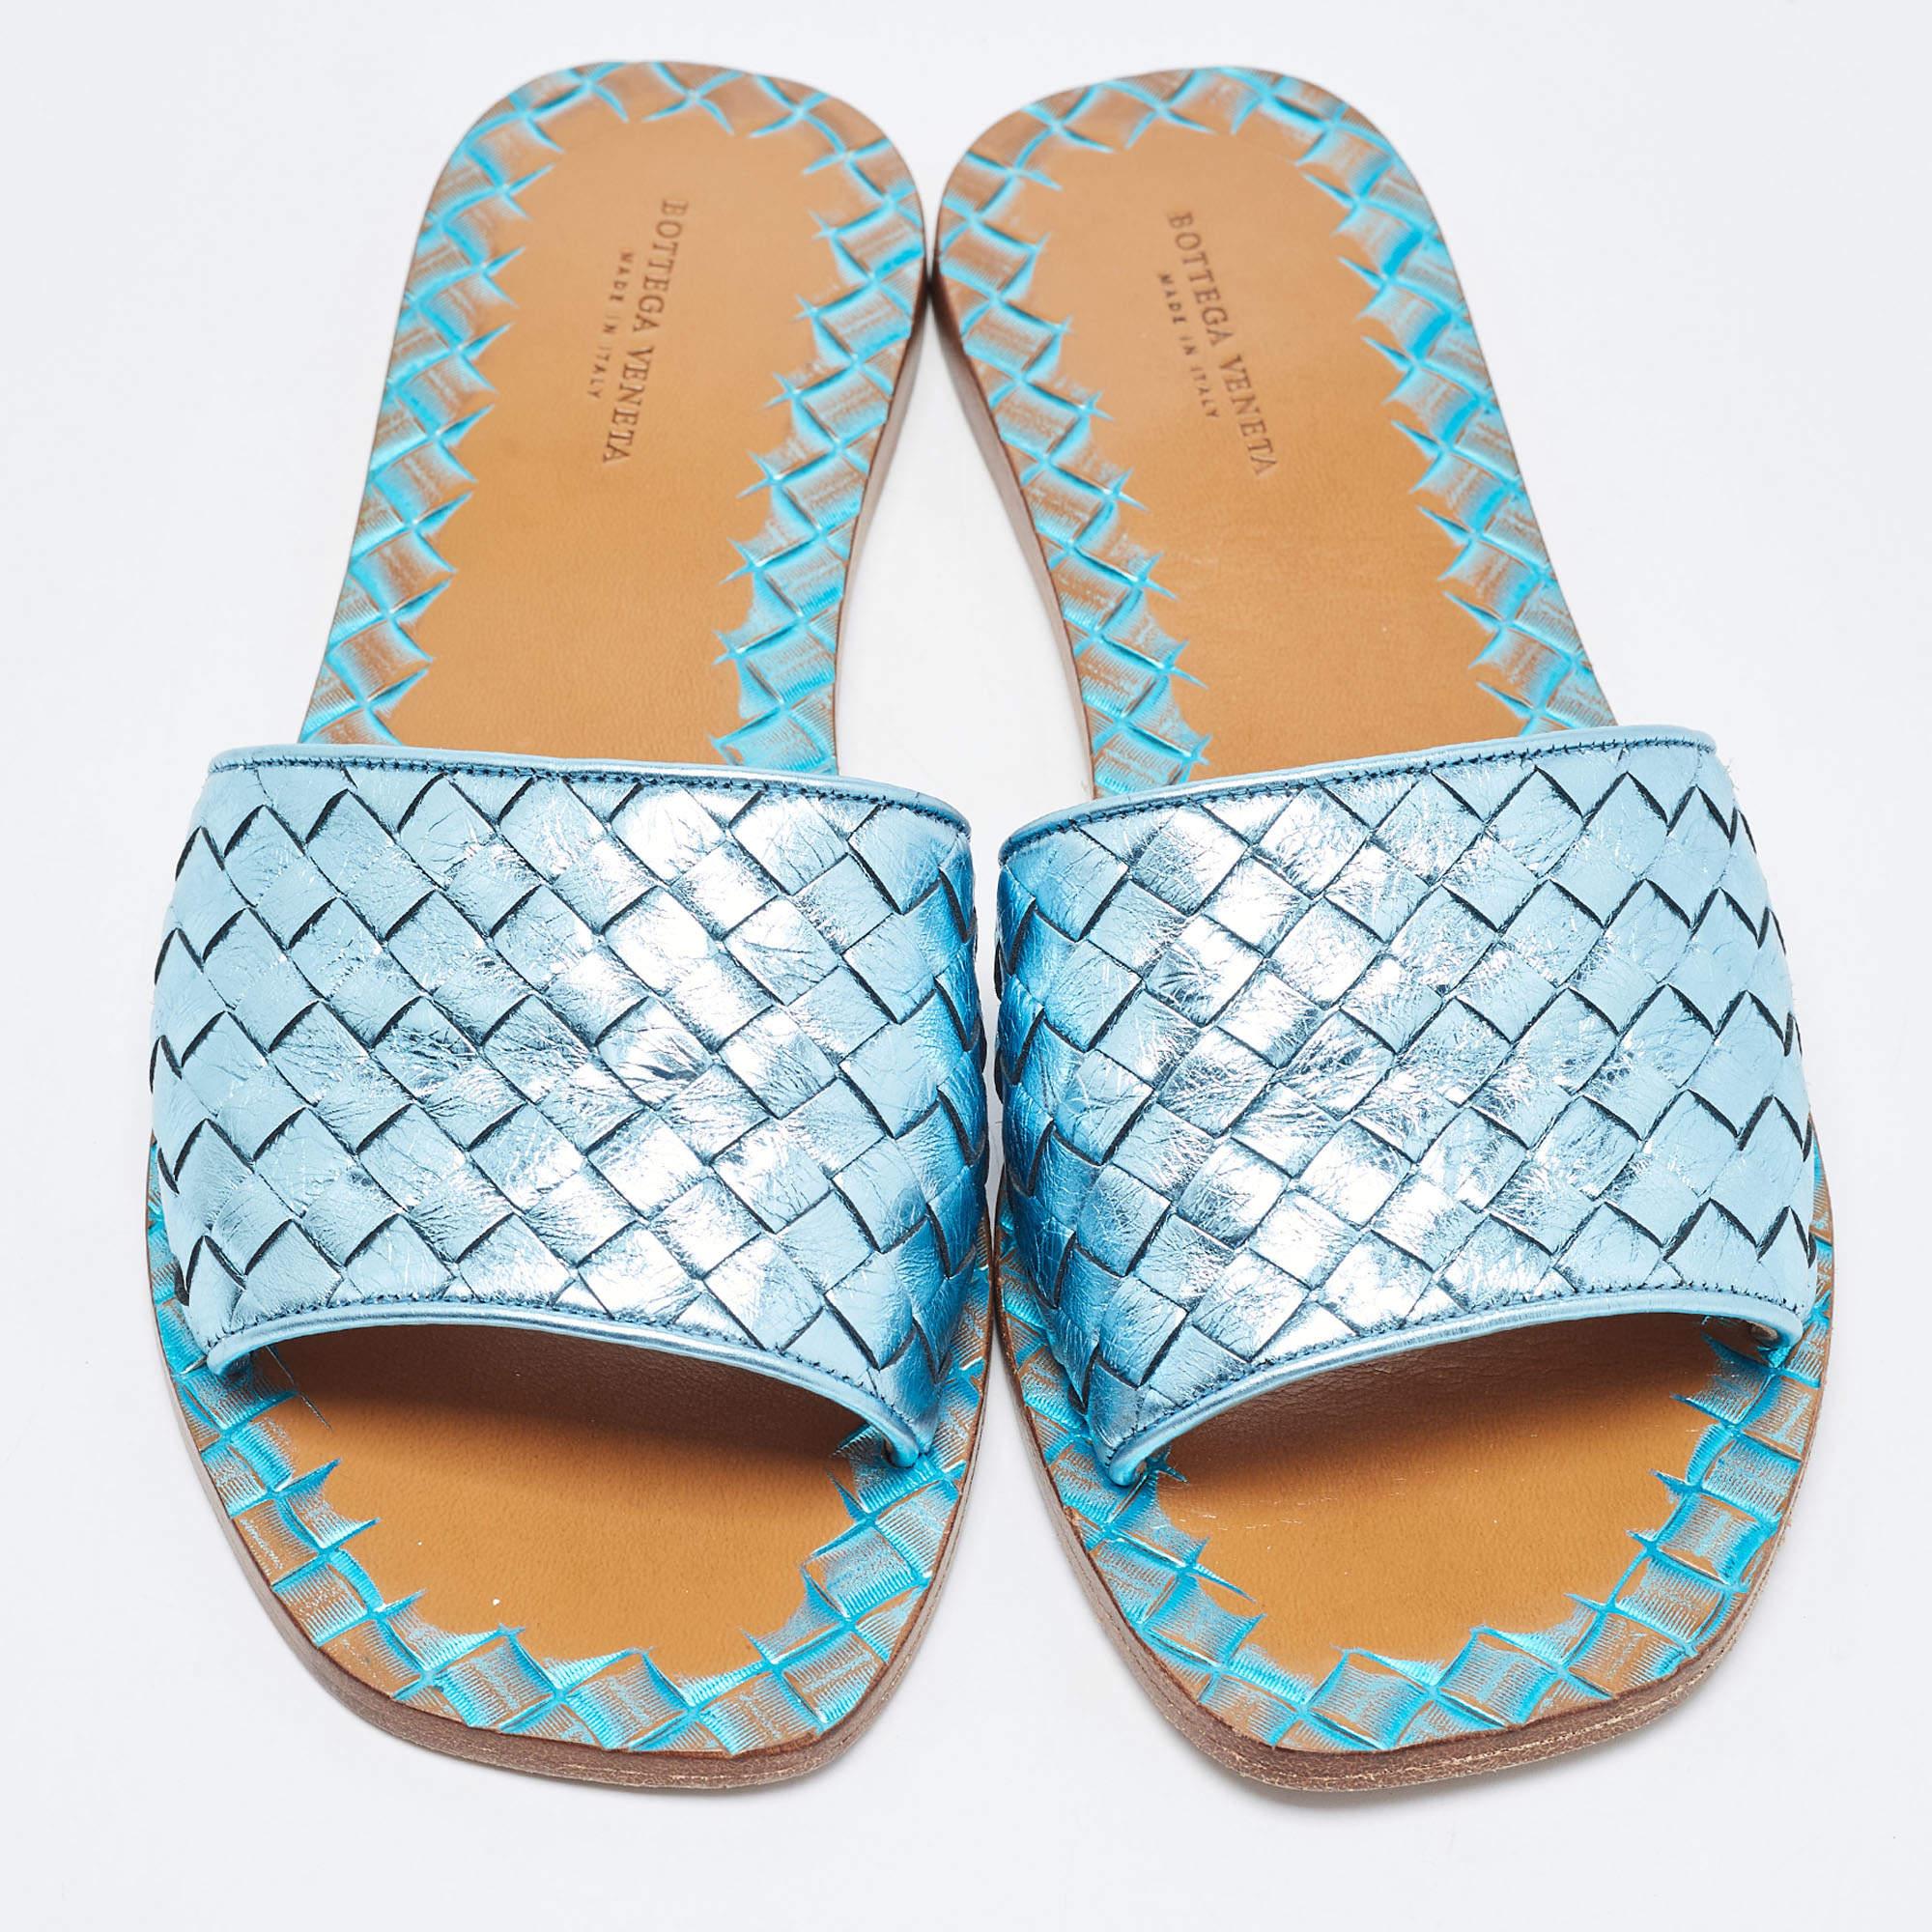 These well-crafted Bottega Veneta flat slides have got you covered for all-day plans. They come in a classy metallic blue design, and they look great on the feet.

Includes: Original Box

